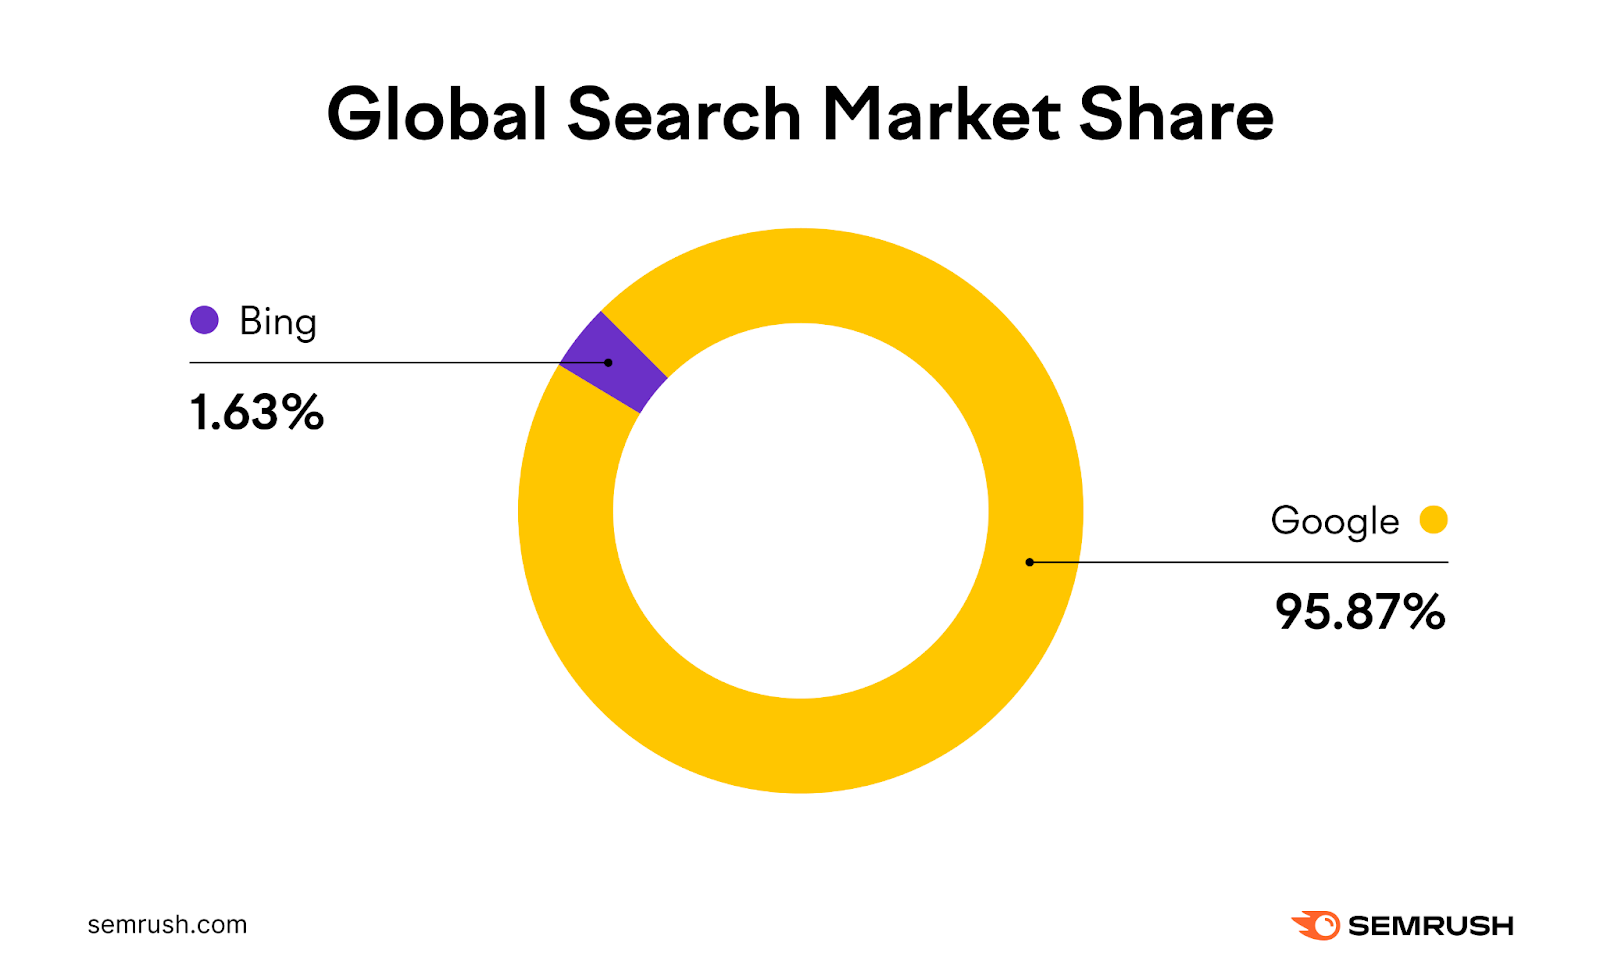 Global search market share graph shows Google gets 95,87% and Bing gets 1,63% market share